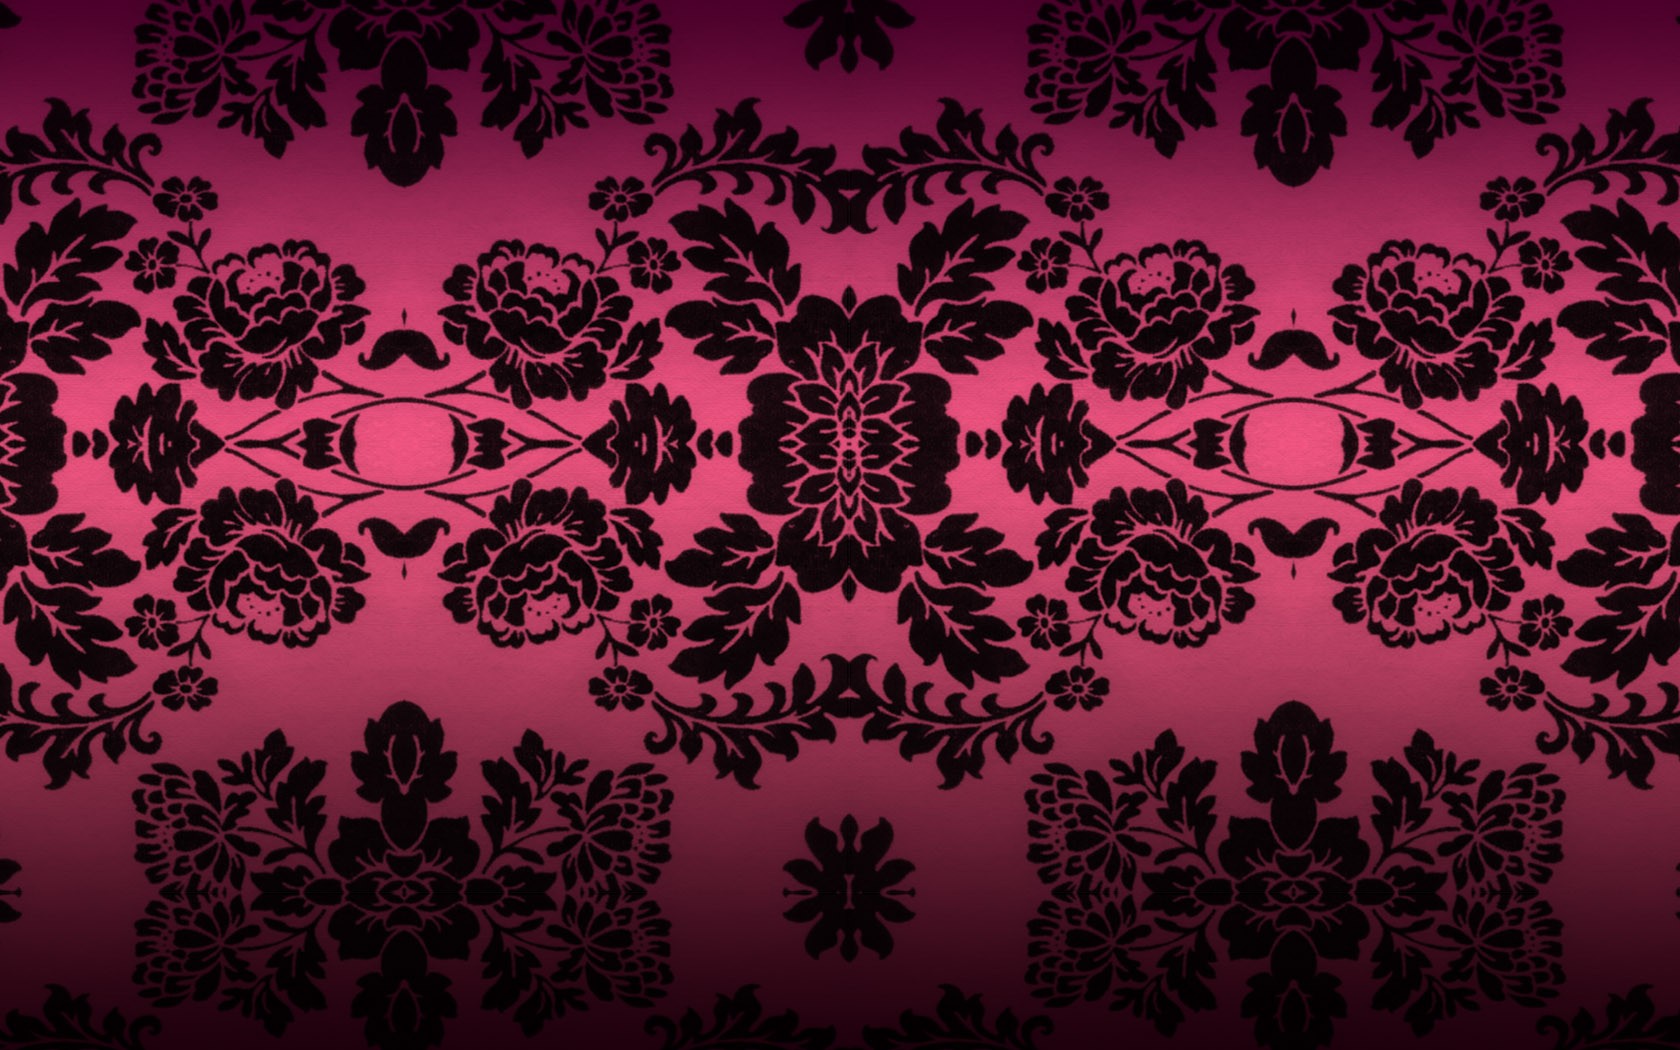  damask wallpaper bedroom  HD Photo Wallpaper Collection HD WALLPAPERS